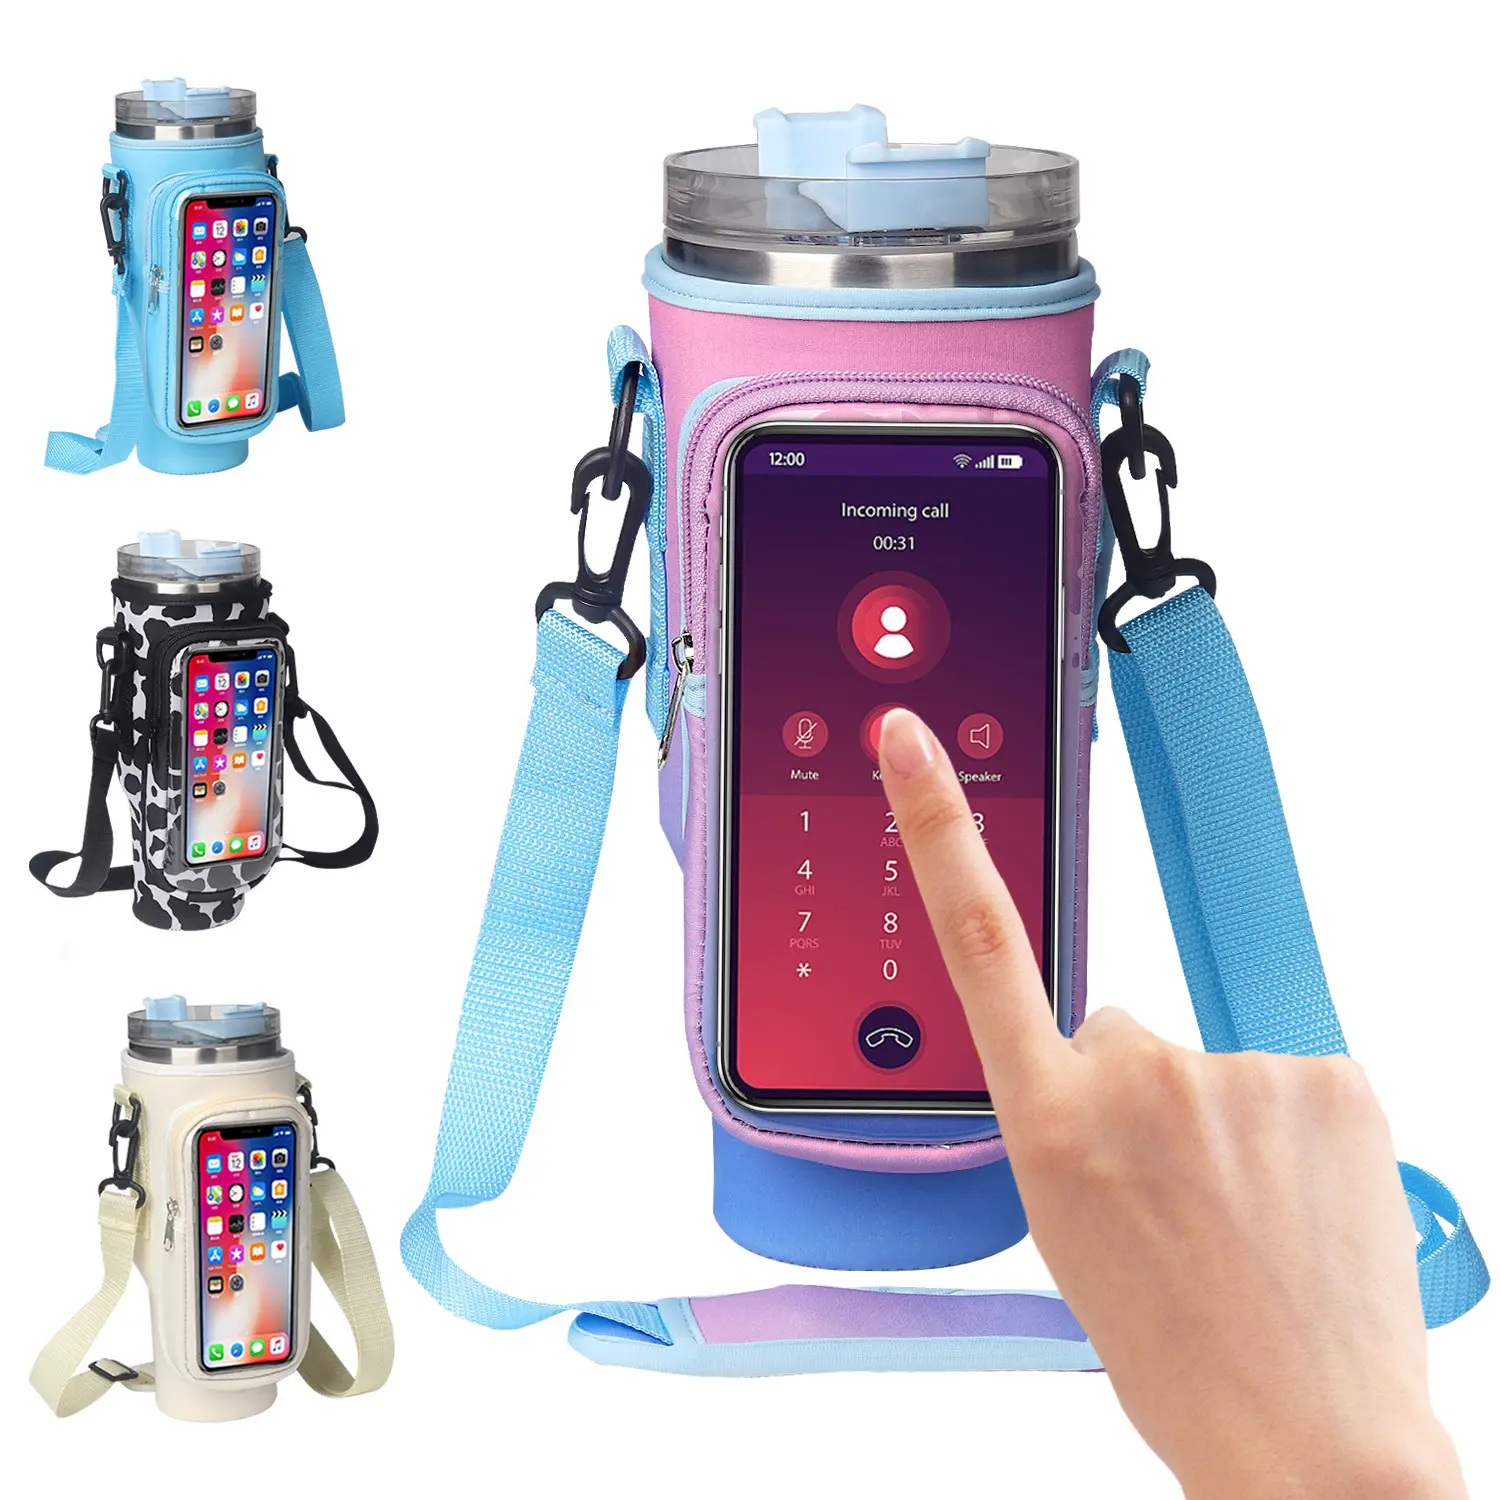 Portable 40oz neoprene adventure quencher water bottle holder sleeve travel waterproof cup holder tumbler pouch with strap